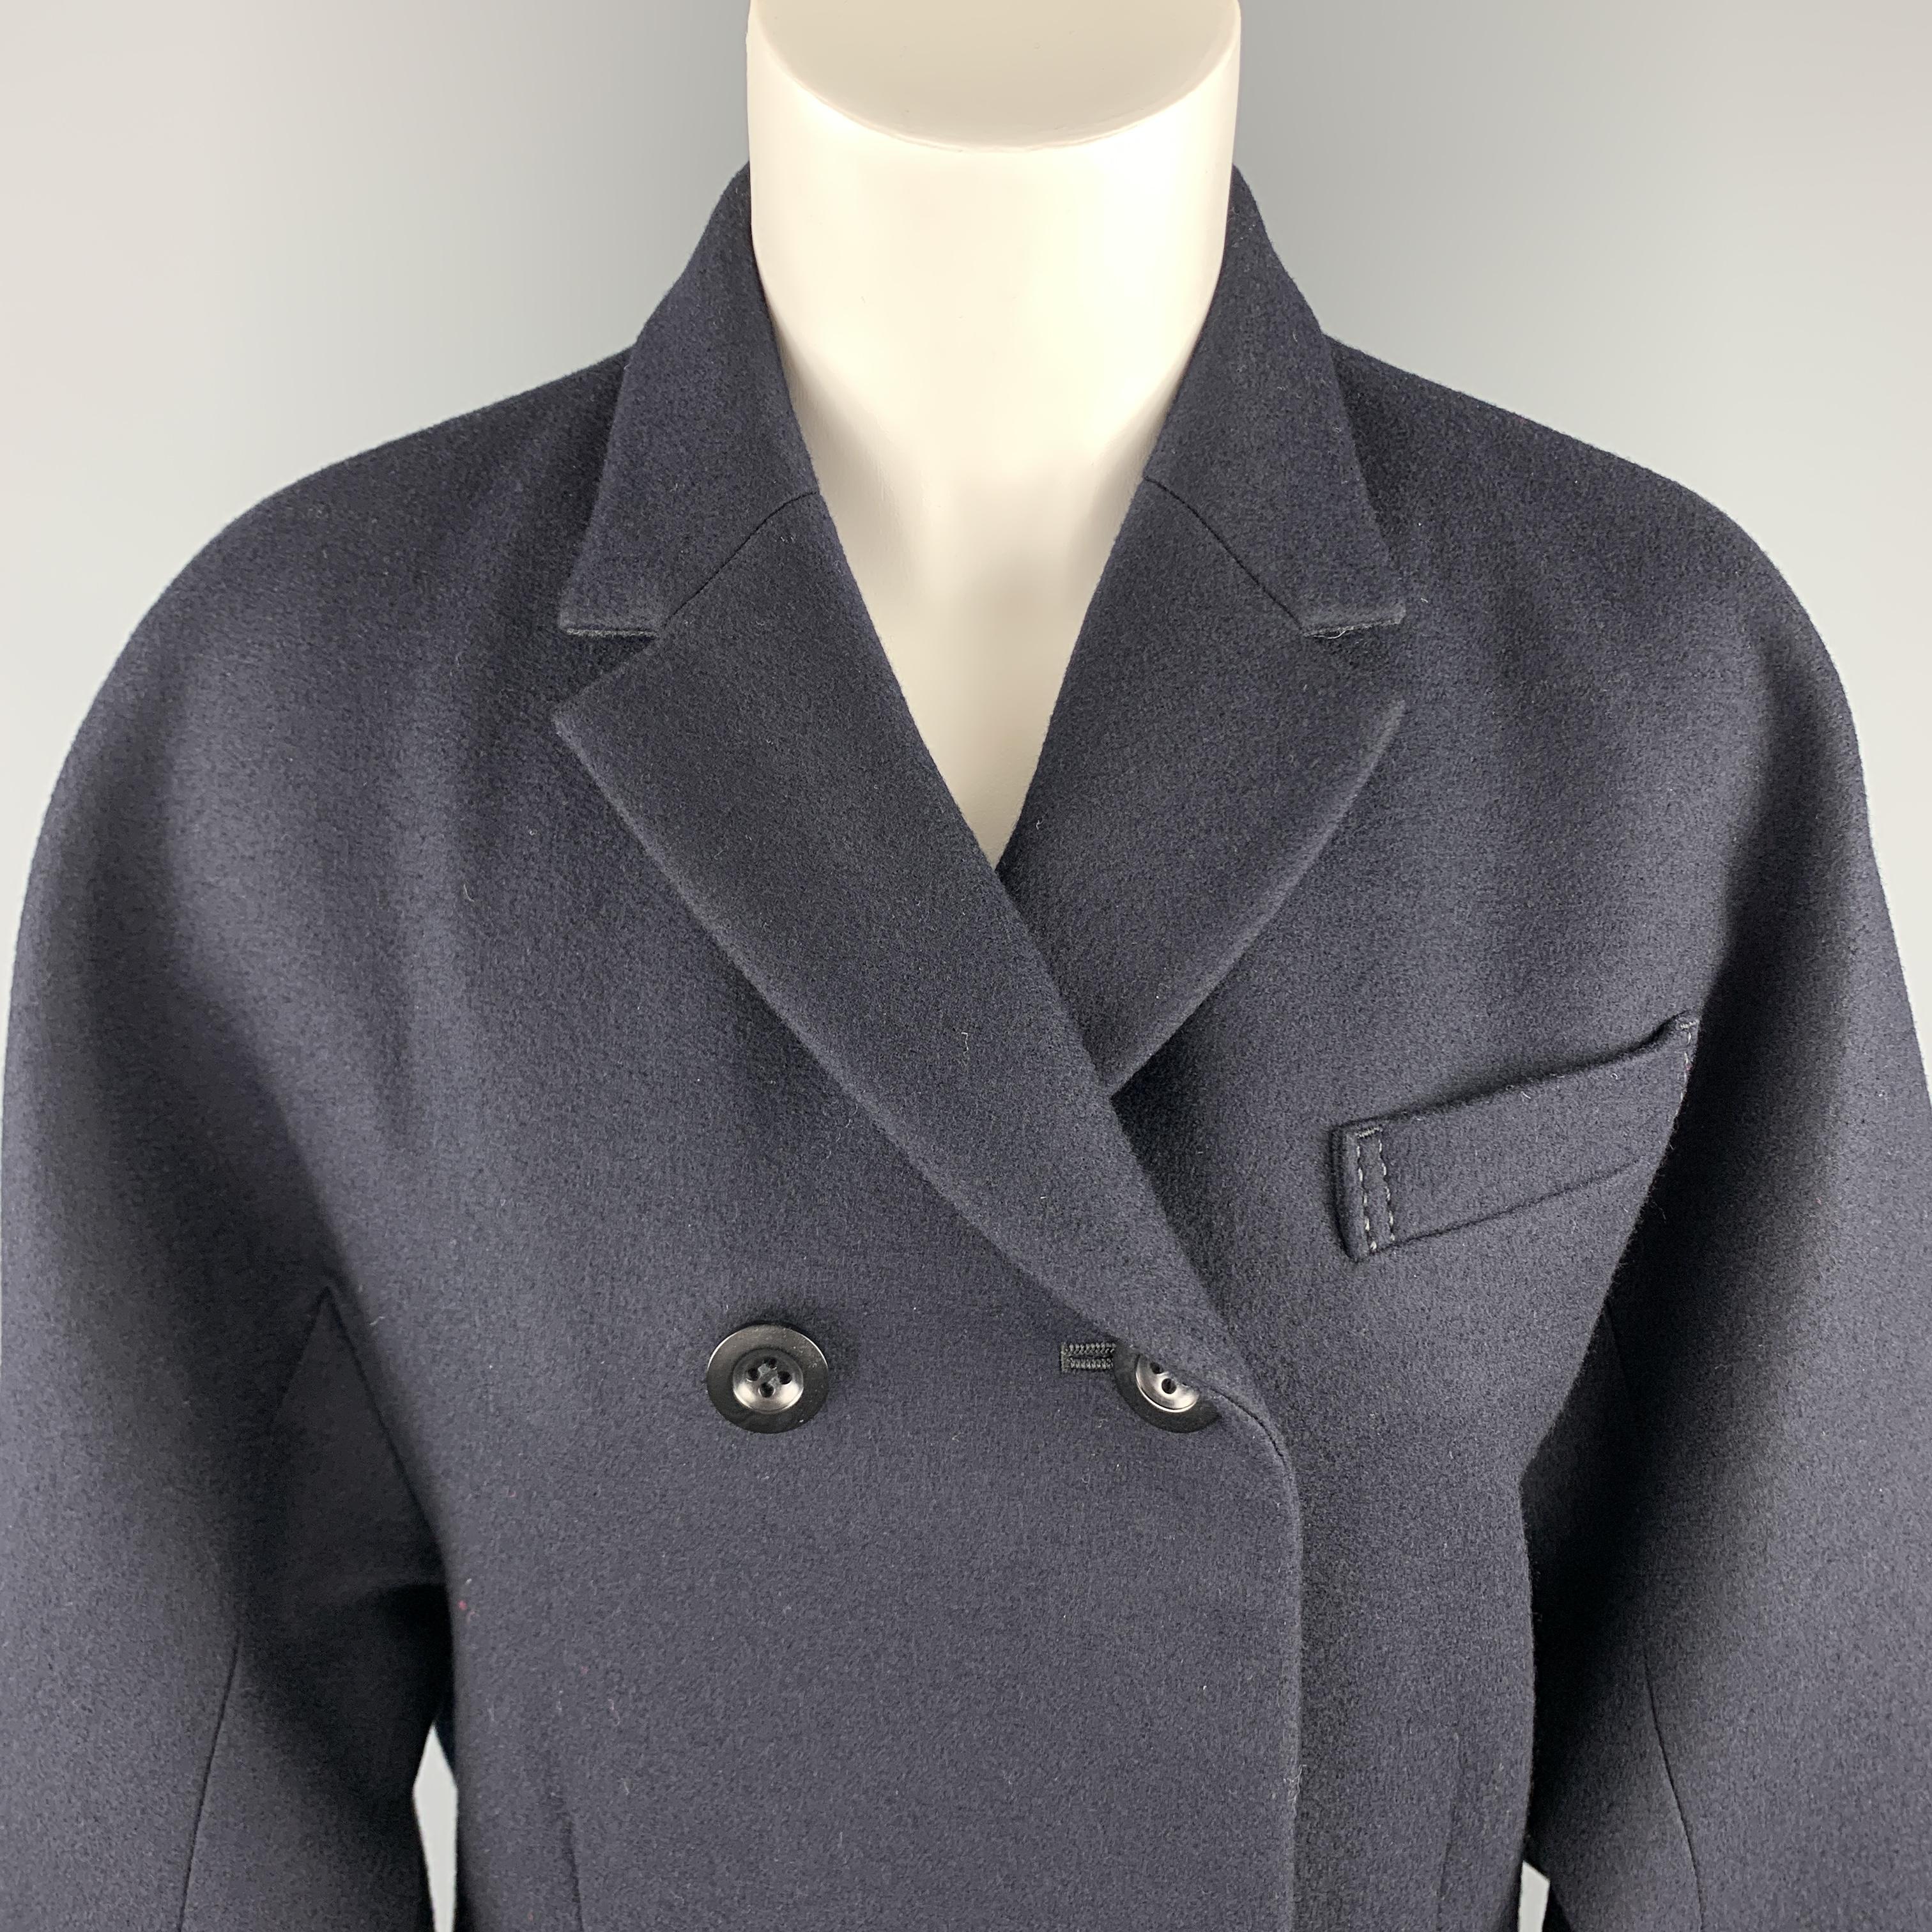 SACAI coat comes in navy wool with a notch lapel, double breasted hidden placket button front, over sized tab cuff sleeves, and asymmetrical zip closure leather panel with belted accents. Made in Japan.

Excellent Pre-Owned Condition.
Marked: JP